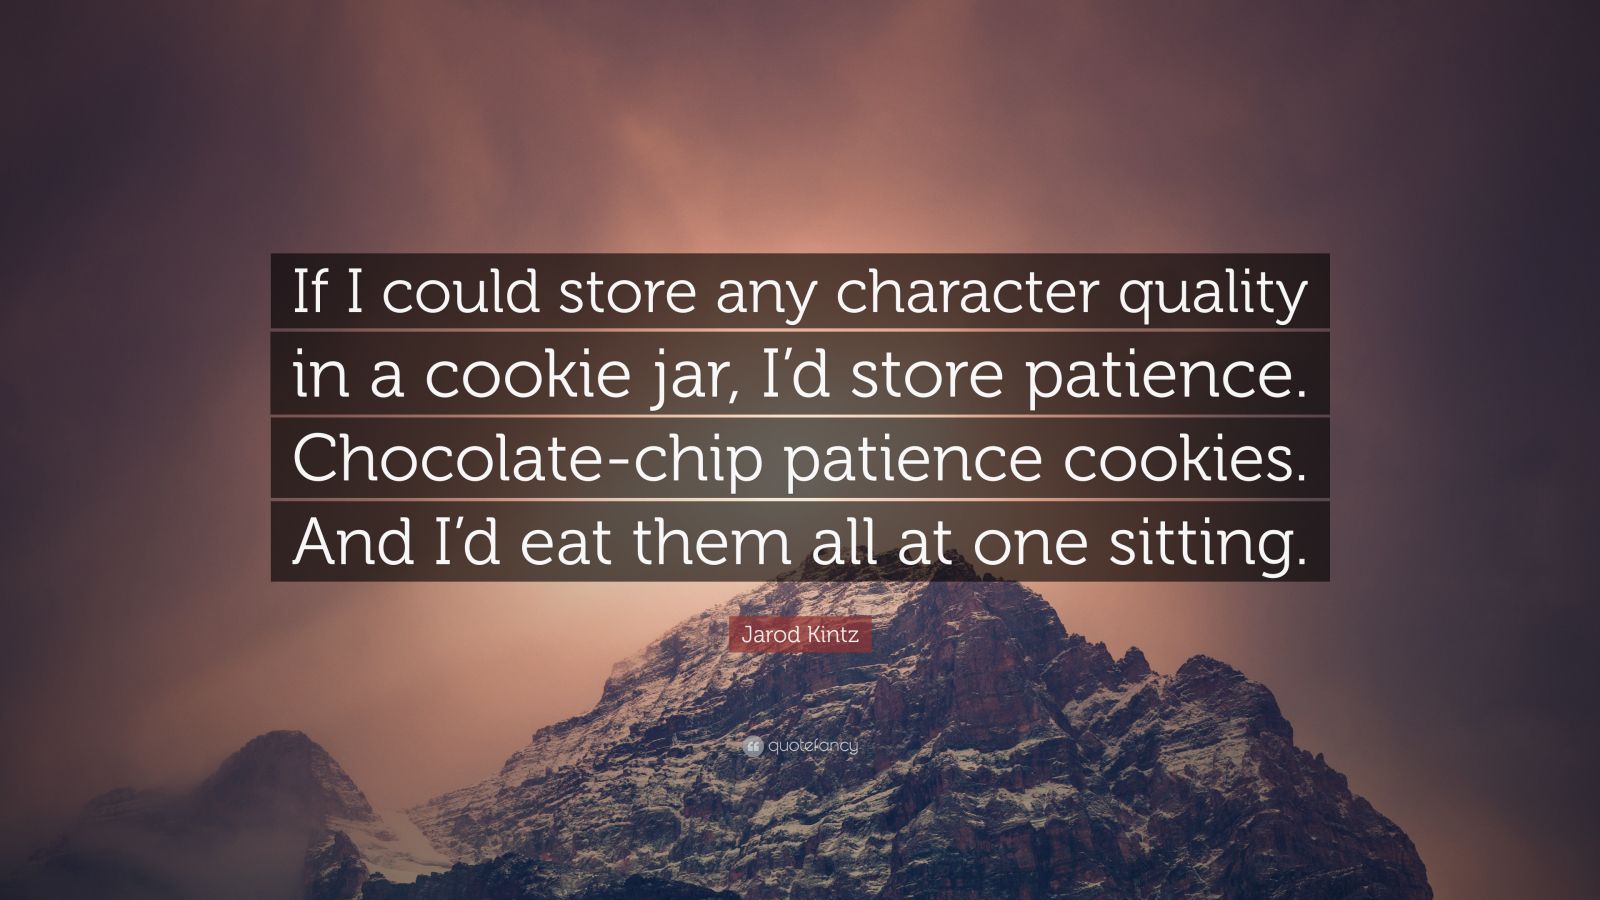 https://quotefancy.com/media/wallpaper/1600x900/6378512-Jarod-Kintz-Quote-If-I-could-store-any-character-quality-in-a.jpg